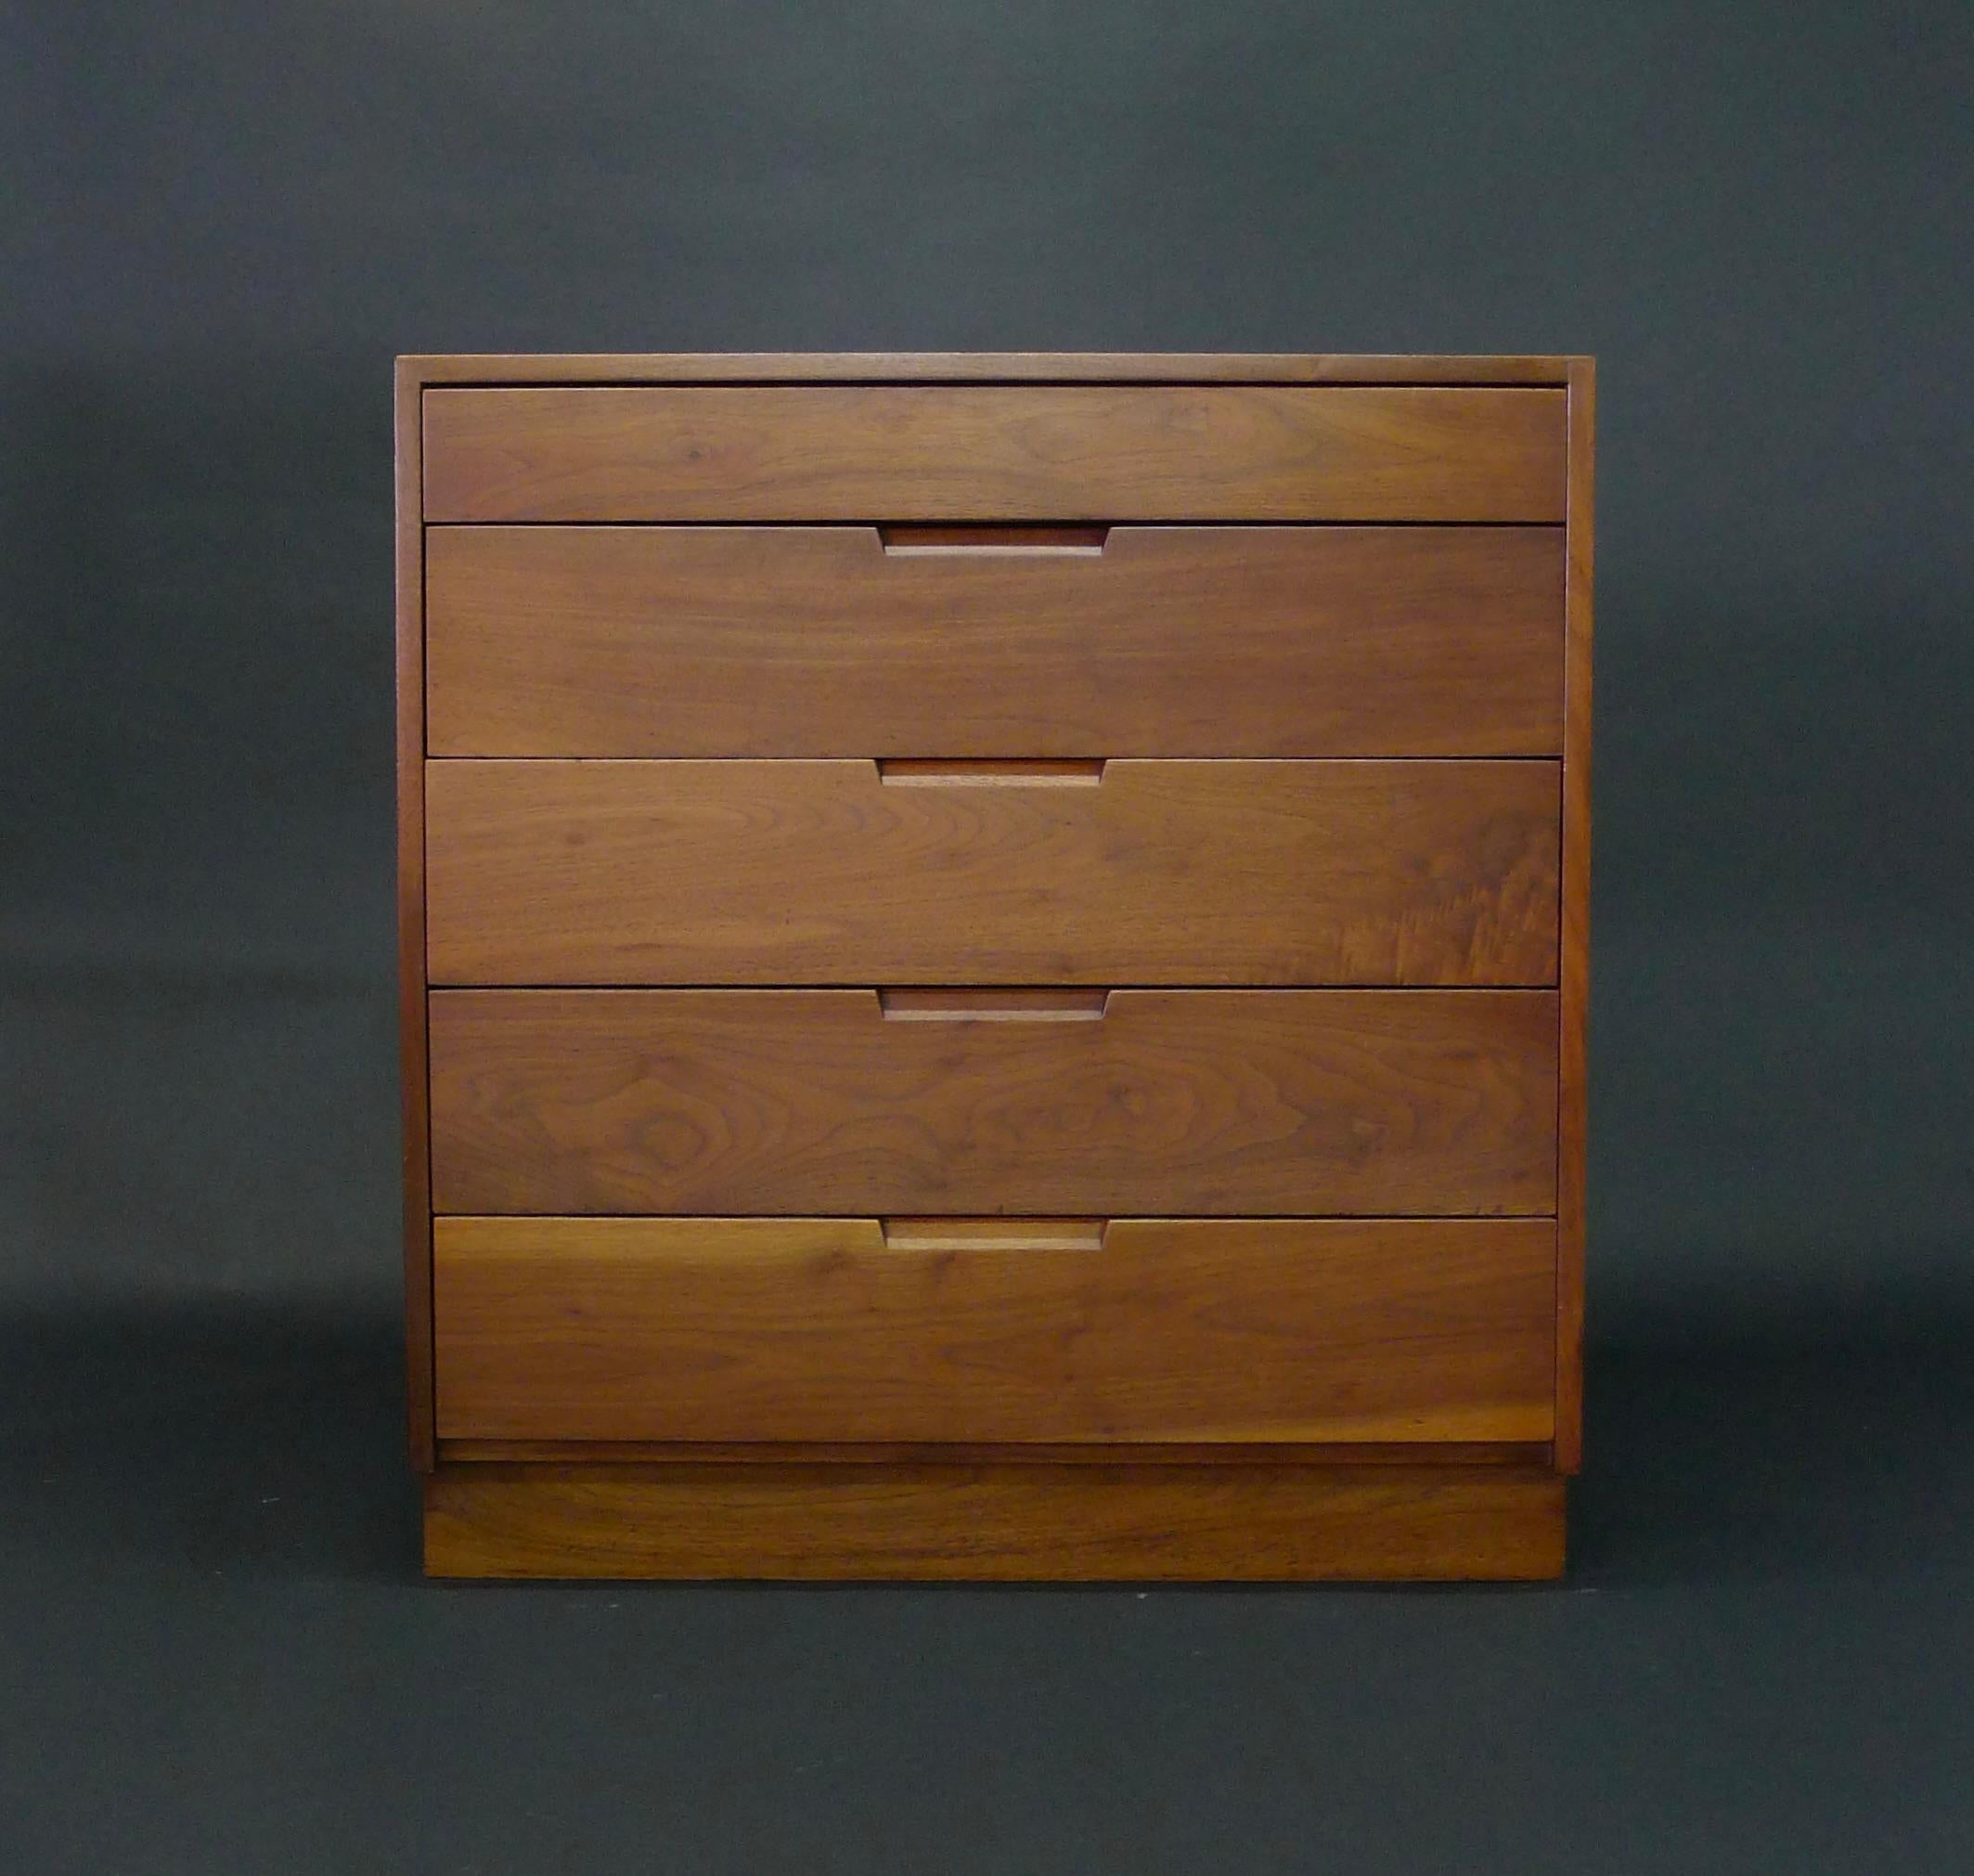 American black walnut chest of five drawers executed by George Nakashima woodworkers in New Hope, Pennsylvania, together with a photocopy of the original invoice dated 1956

Literature: see Mira Nakashima, Nature, Form & Spirit: The Life and Legacy